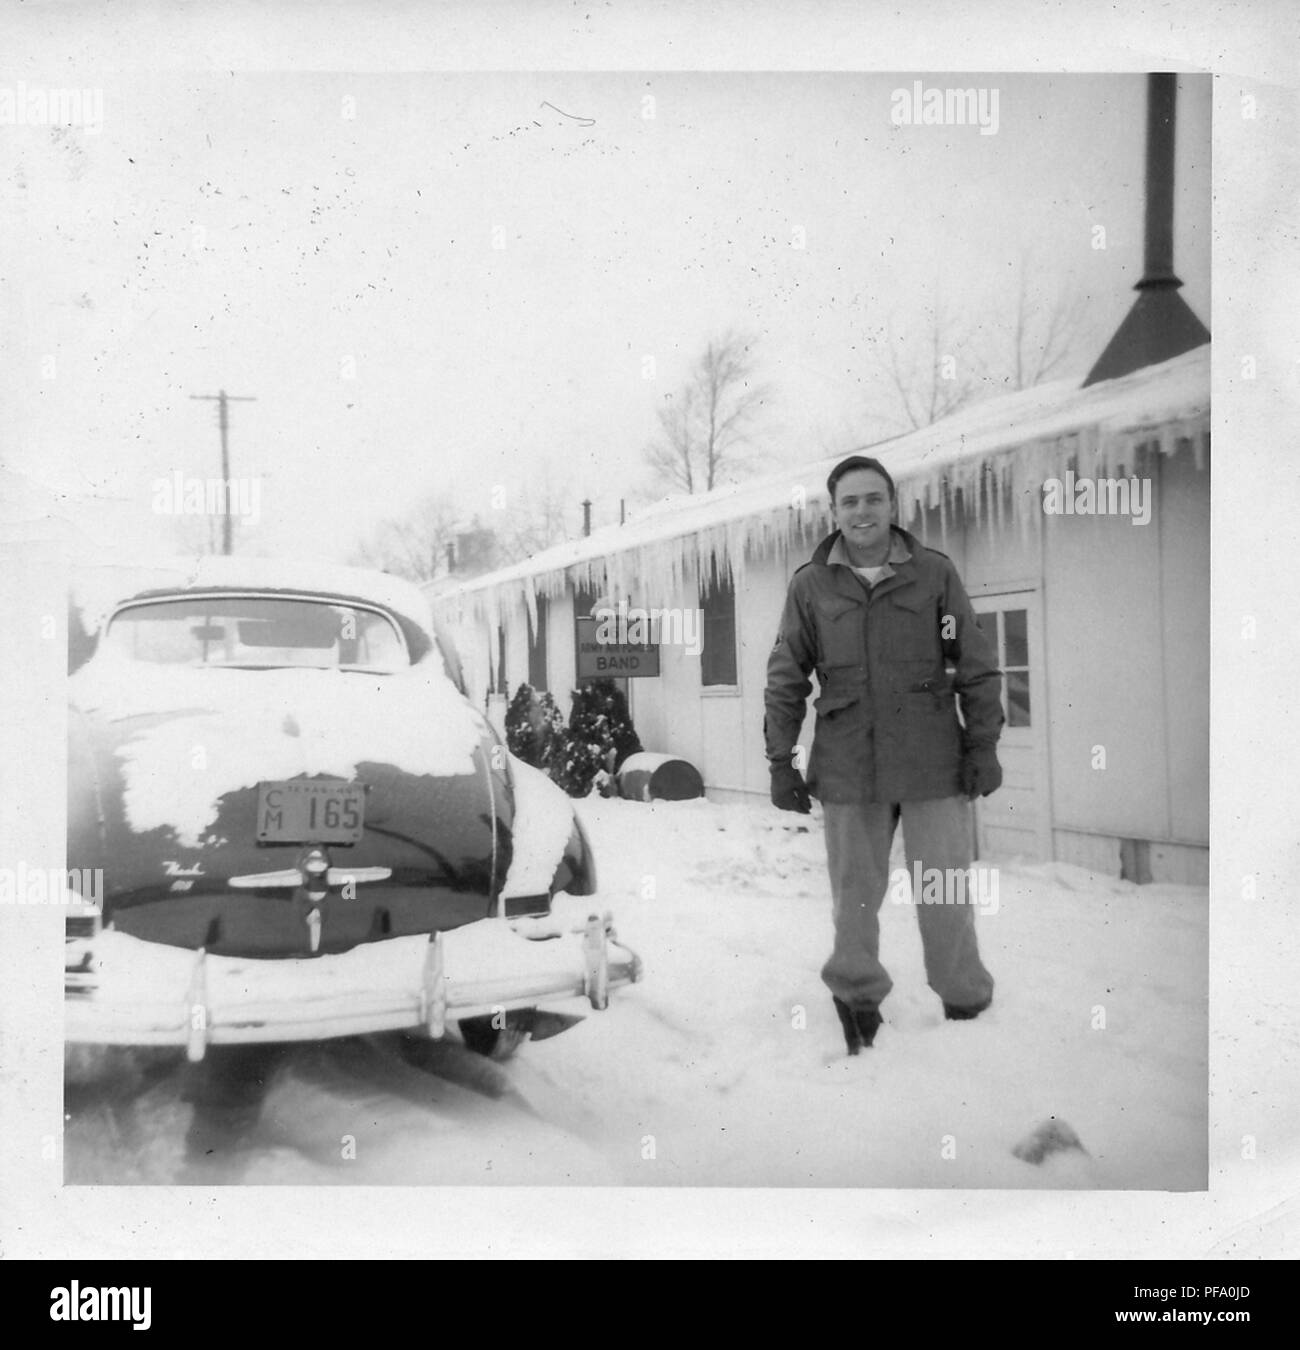 Black and white photograph, showing a smiling man, in full length, wearing military clothes and hat, standing outside in the snow, with a single story building in the background, a vintage car at left, and a sign on the building reading '661st Army Airforce Band, ' likely photographed in Ohio during World War II, 1945. () Stock Photo